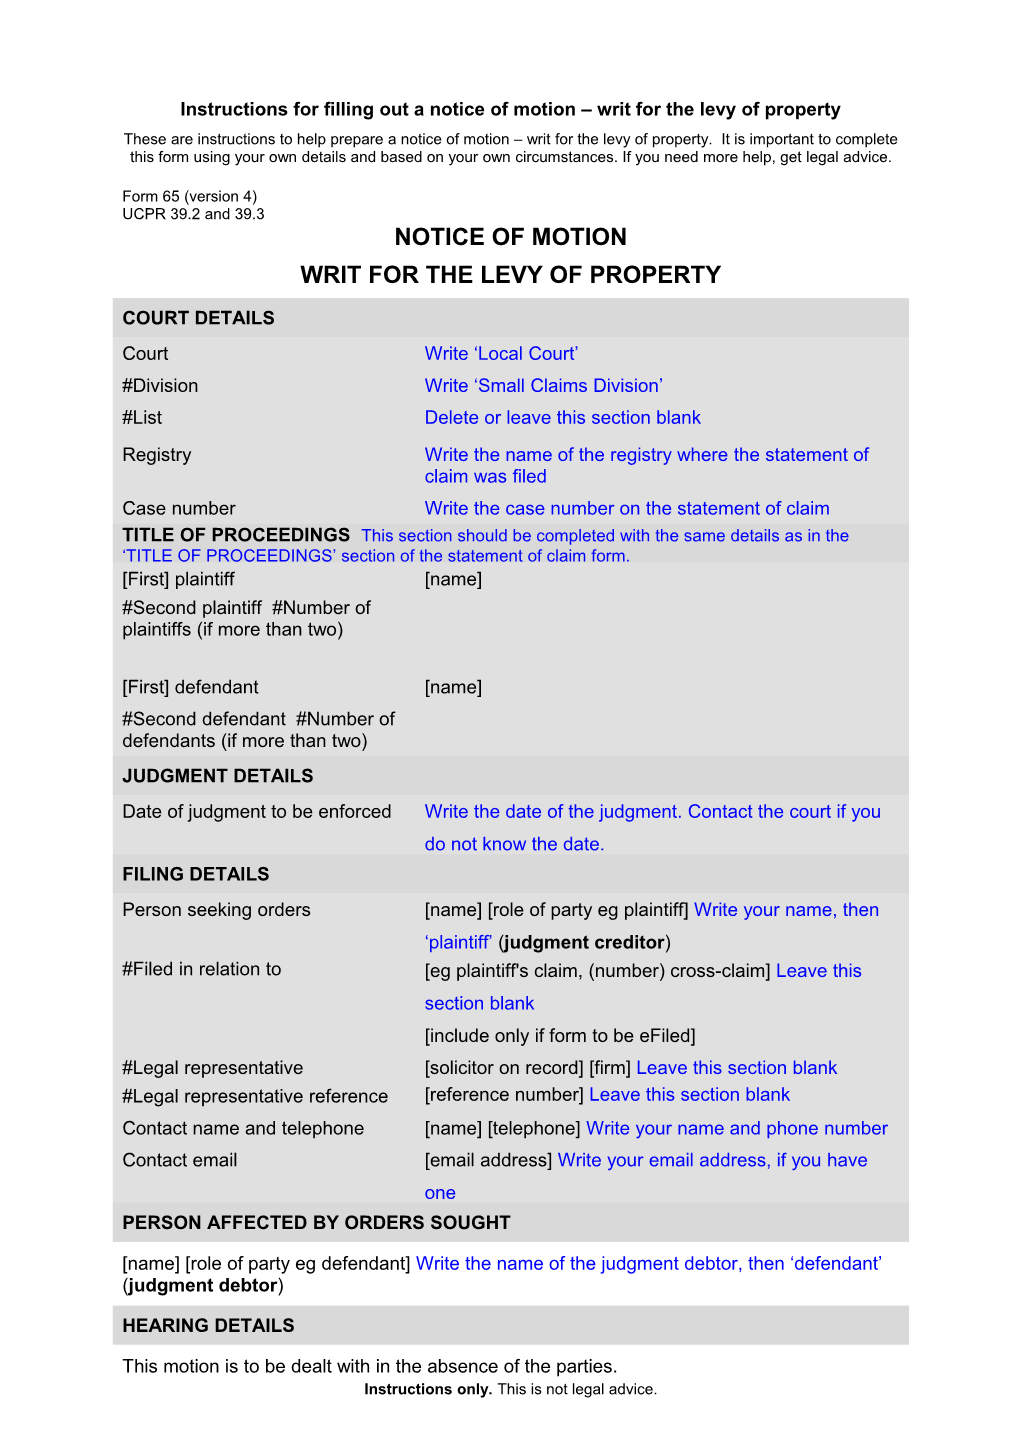 Form 65 - Notion of Motion Writ for the Levy of Property